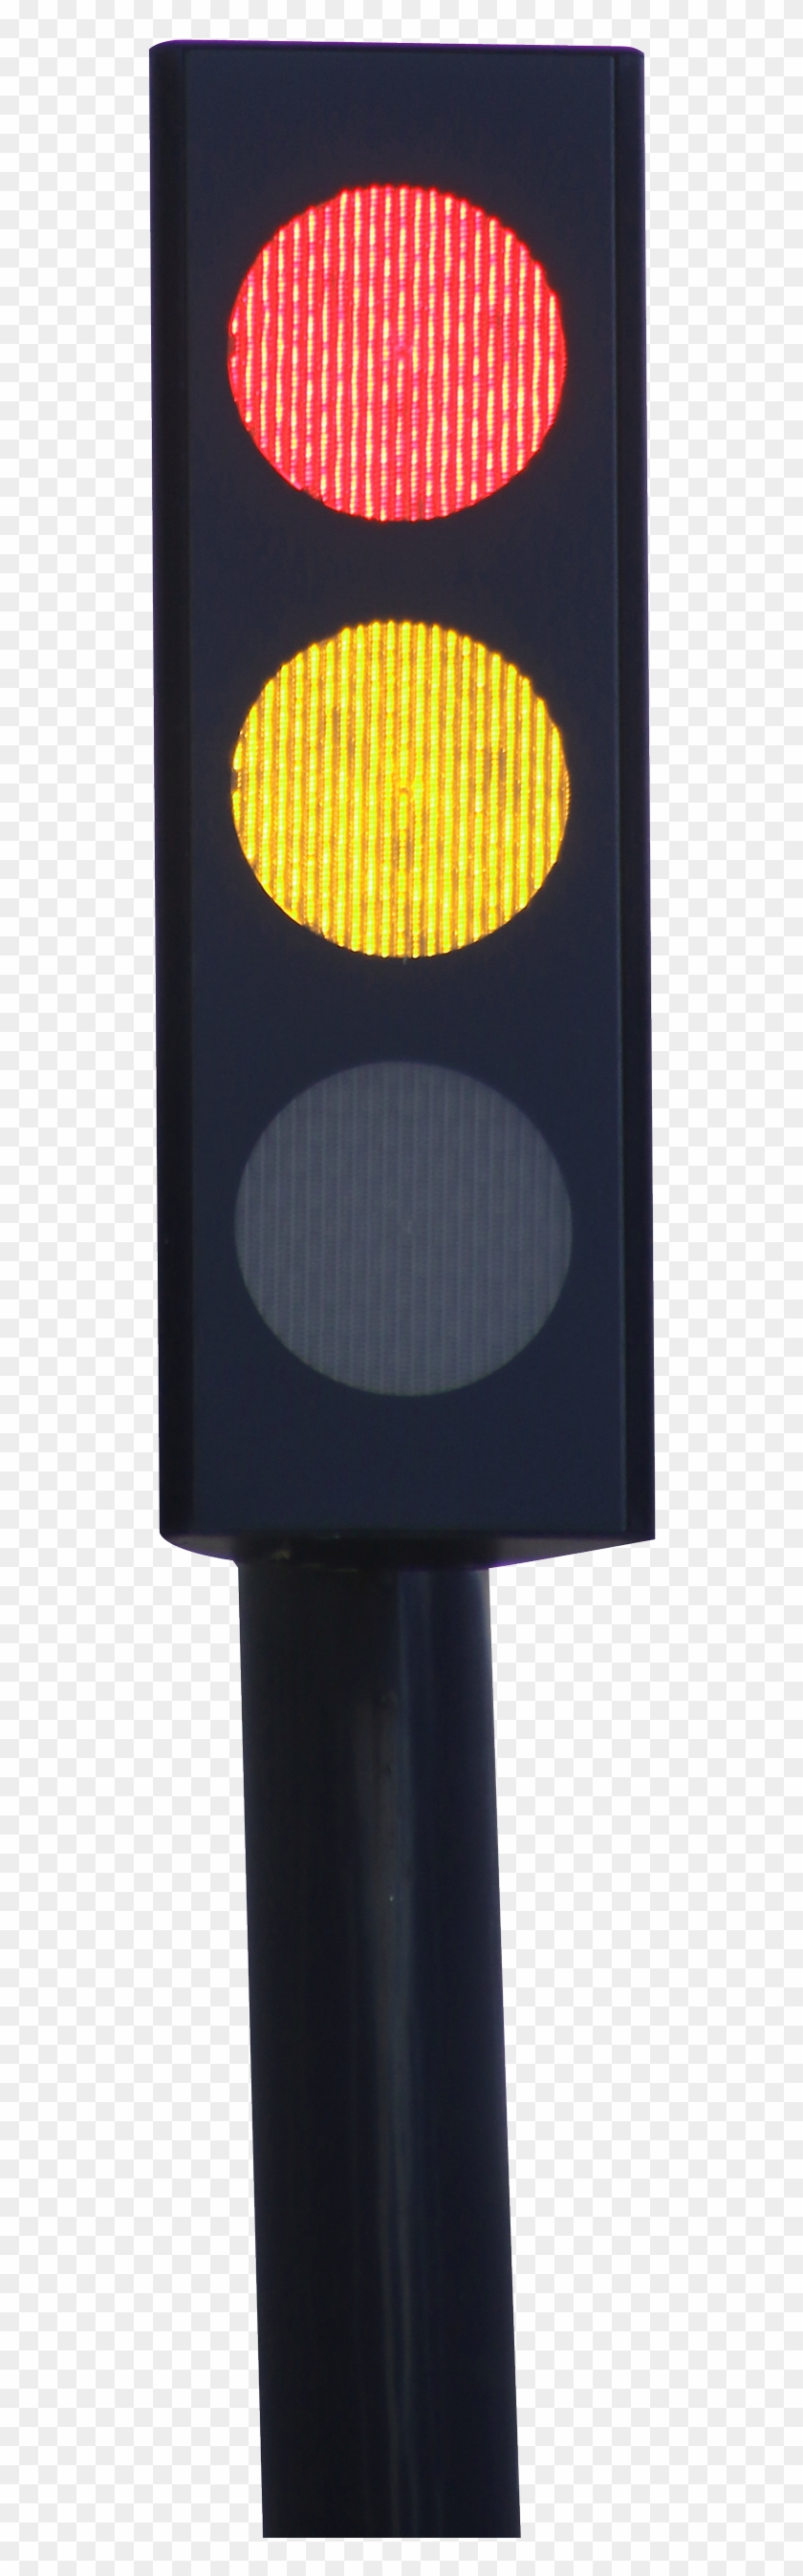 Traffic Light Over Yellow Sign On White Vector Clipart - Traffic Light Png #1167048